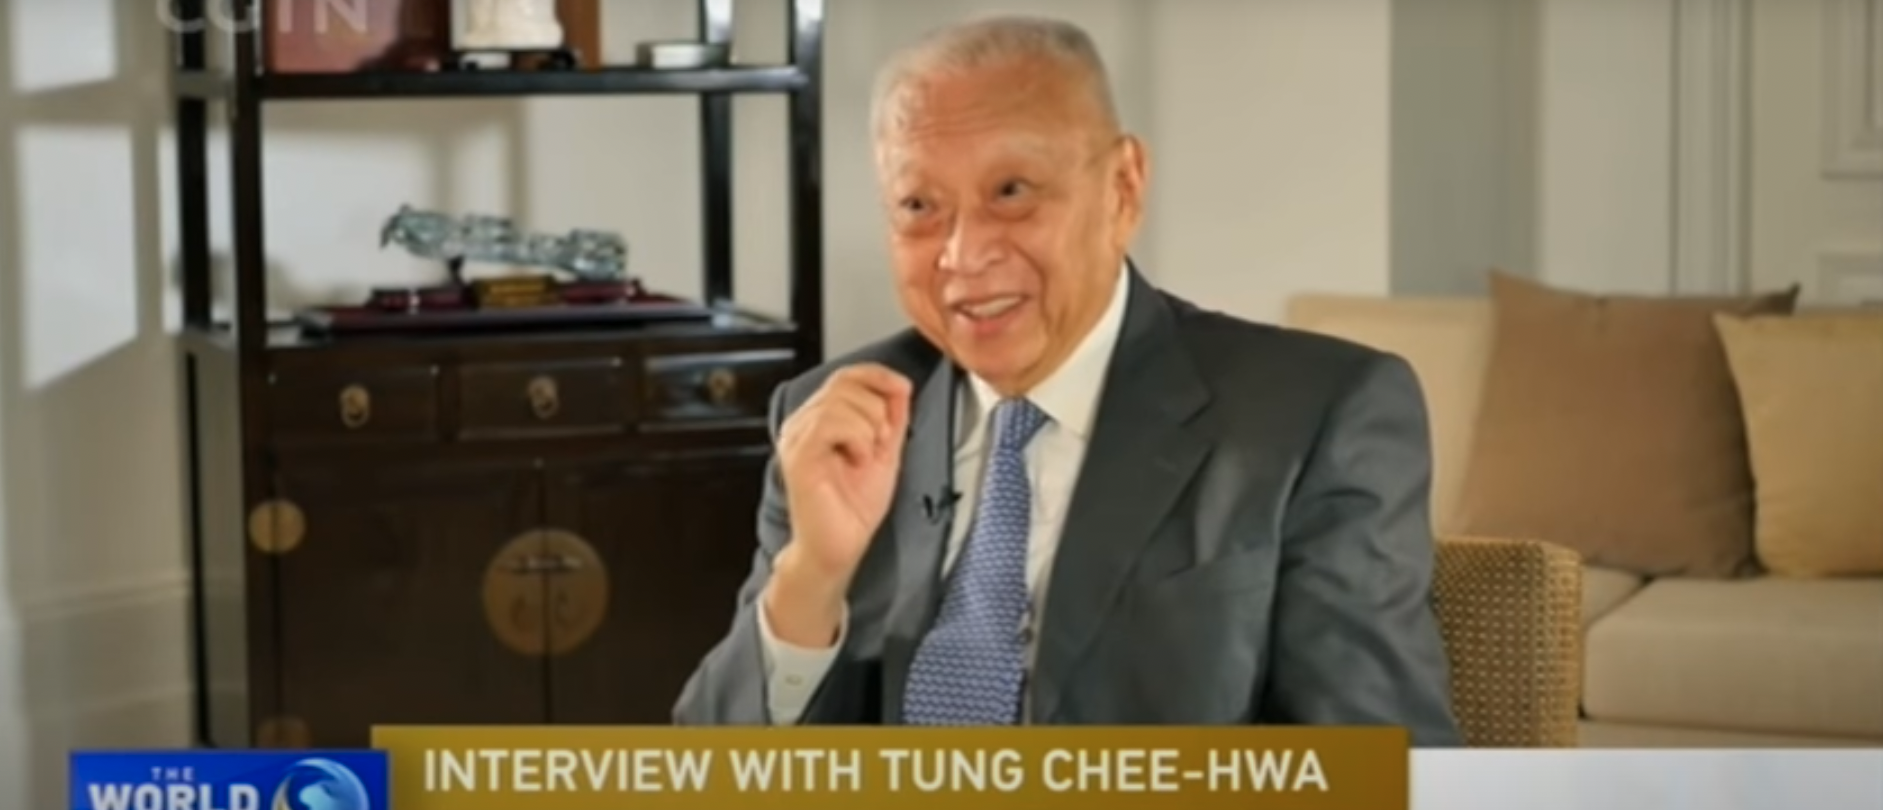 A figure linked to many malign PRC influence operations across the United States, Tung Chee-hwa is the vice chairman of the Chinese People’s Political Consultative Conference (CPPCC), which controls the United Front Work Department (UFWD) to which Chen Xu has been promoted. [YouTube/Screenshot/CGTN]